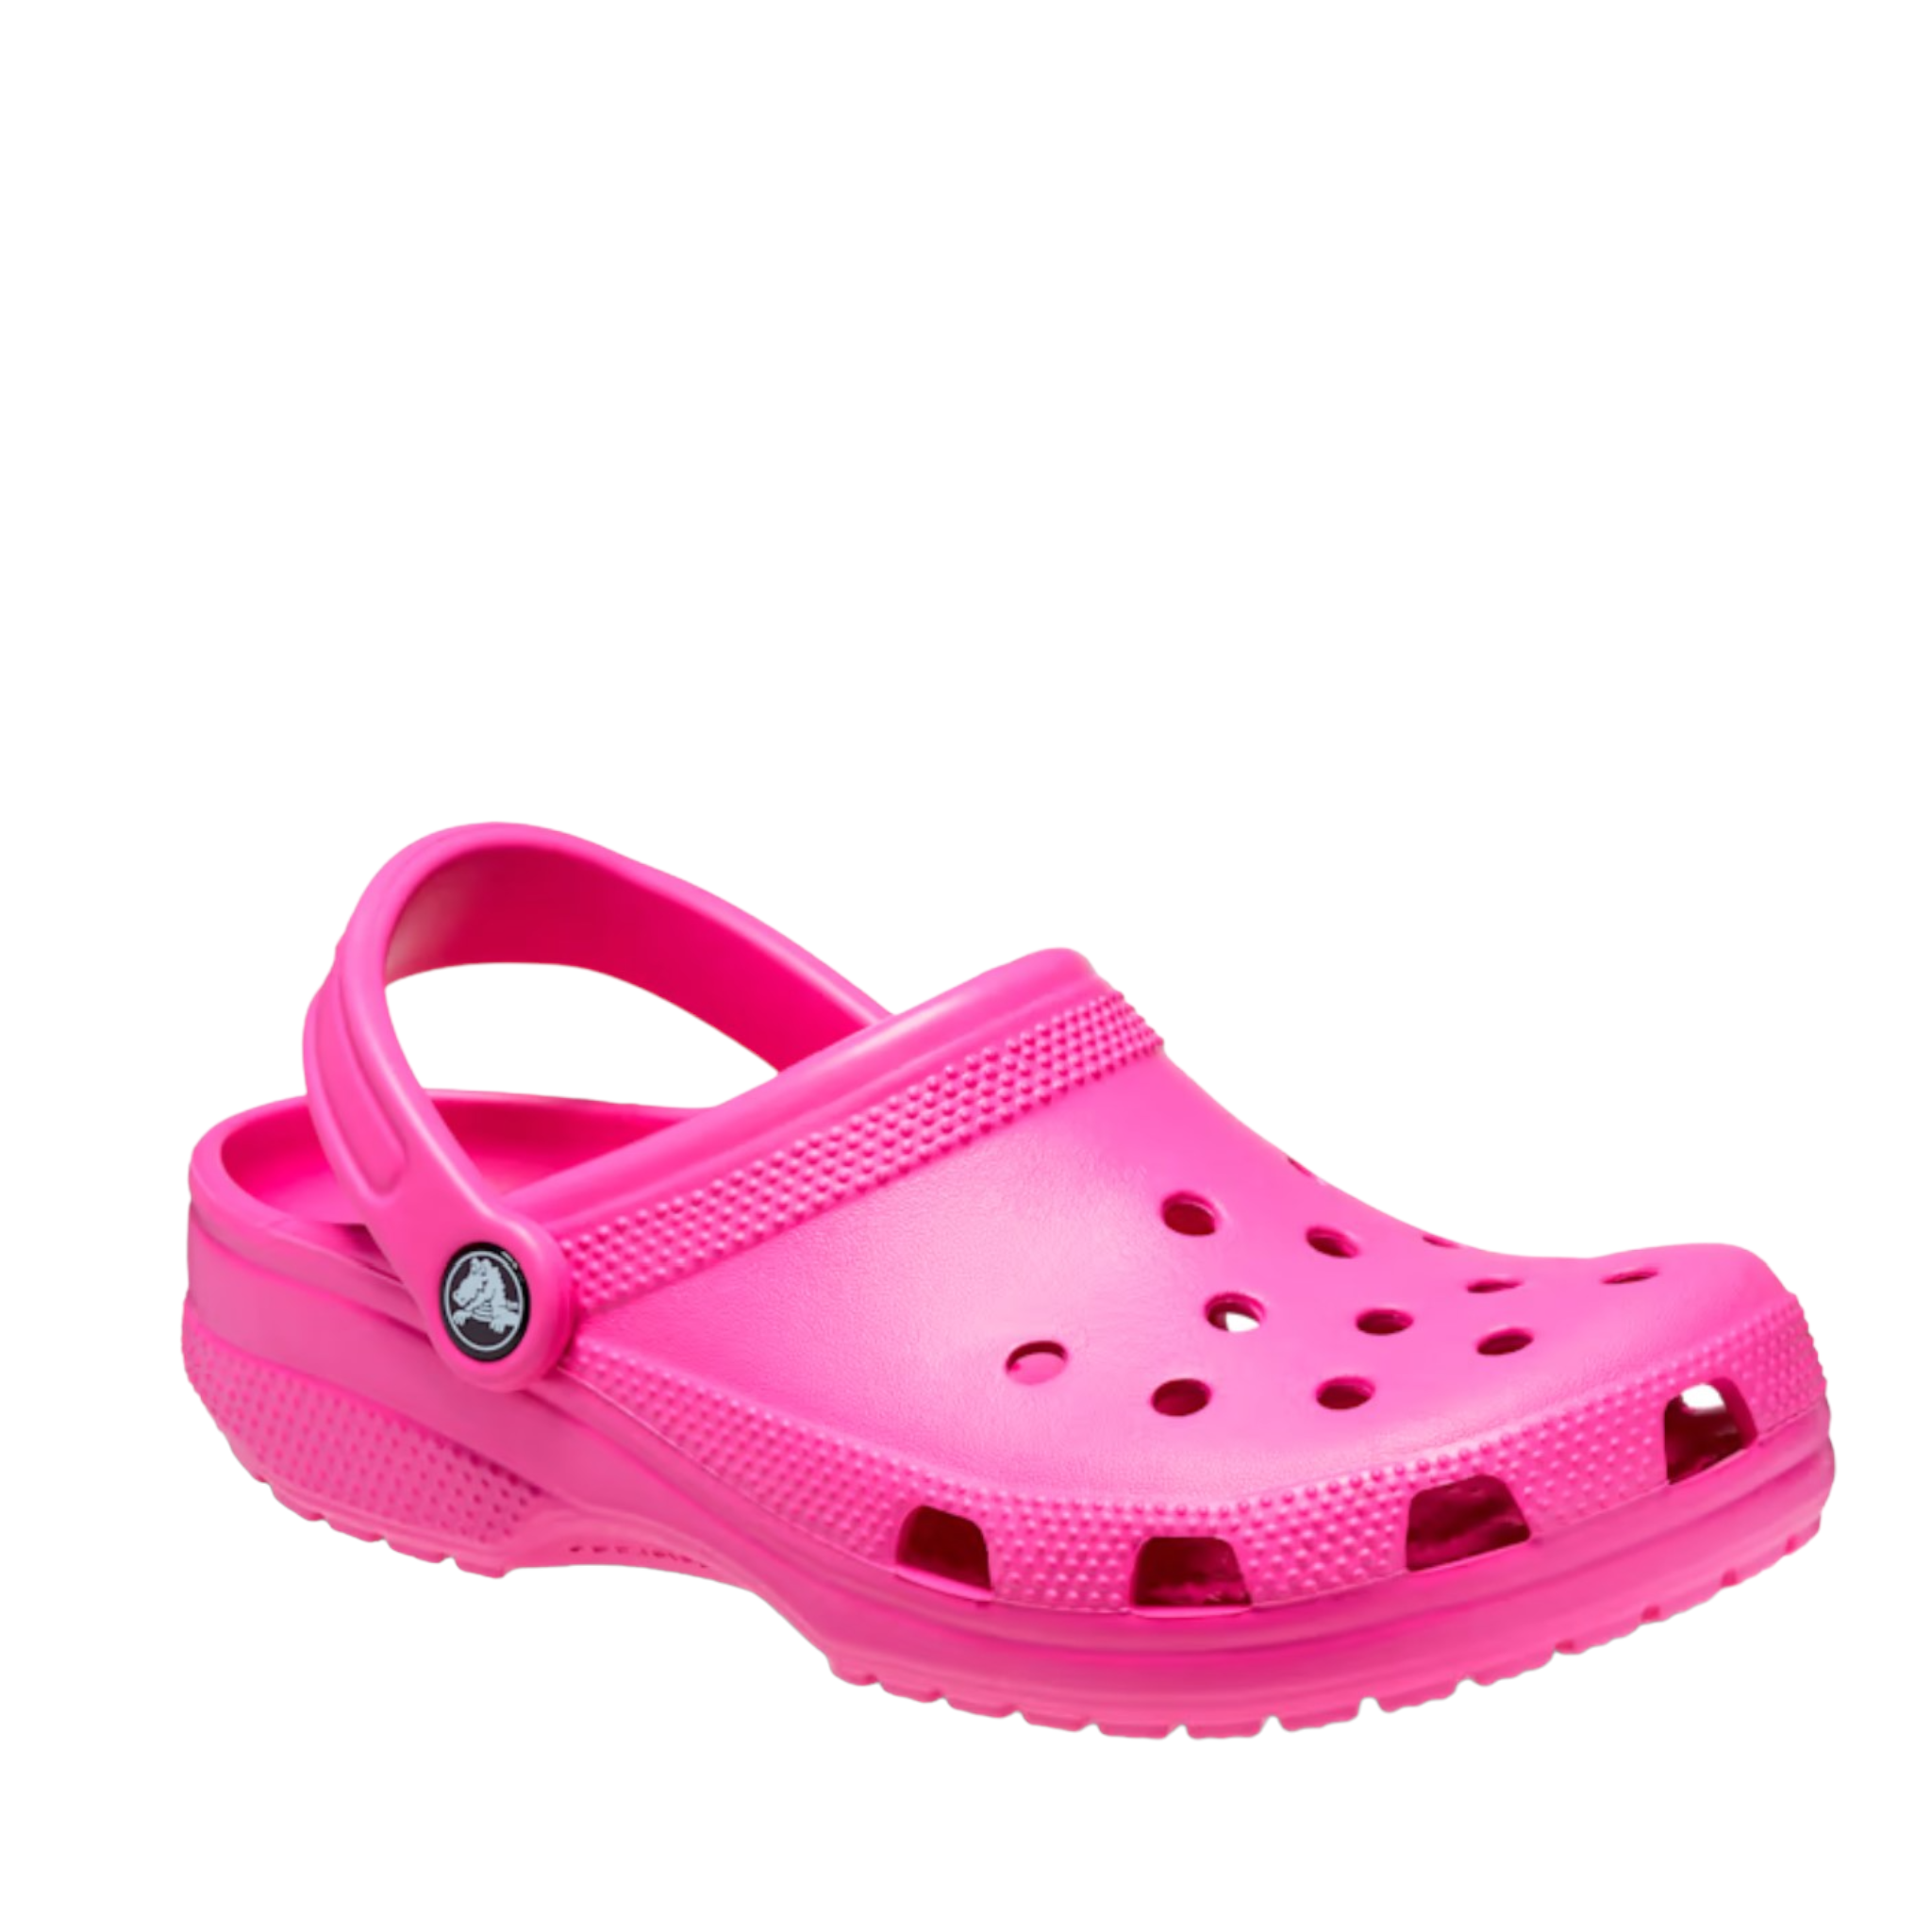 Shop Classic Clog Crocs - with shoe&me - from Crocs - Clogs - Clog, Mens, Summer, Winter, Womens - [collection]